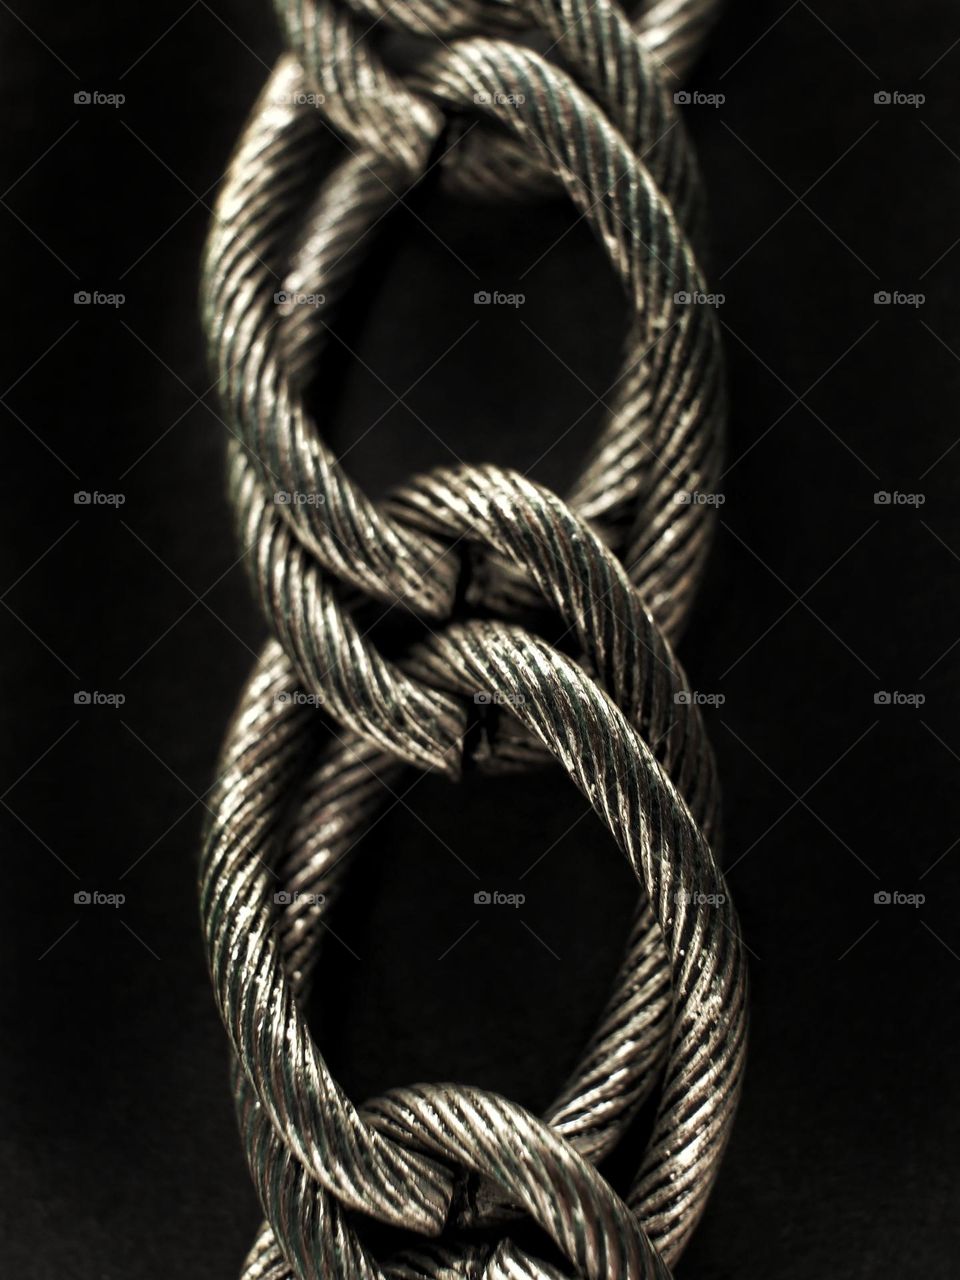 Chains of a silver necklace